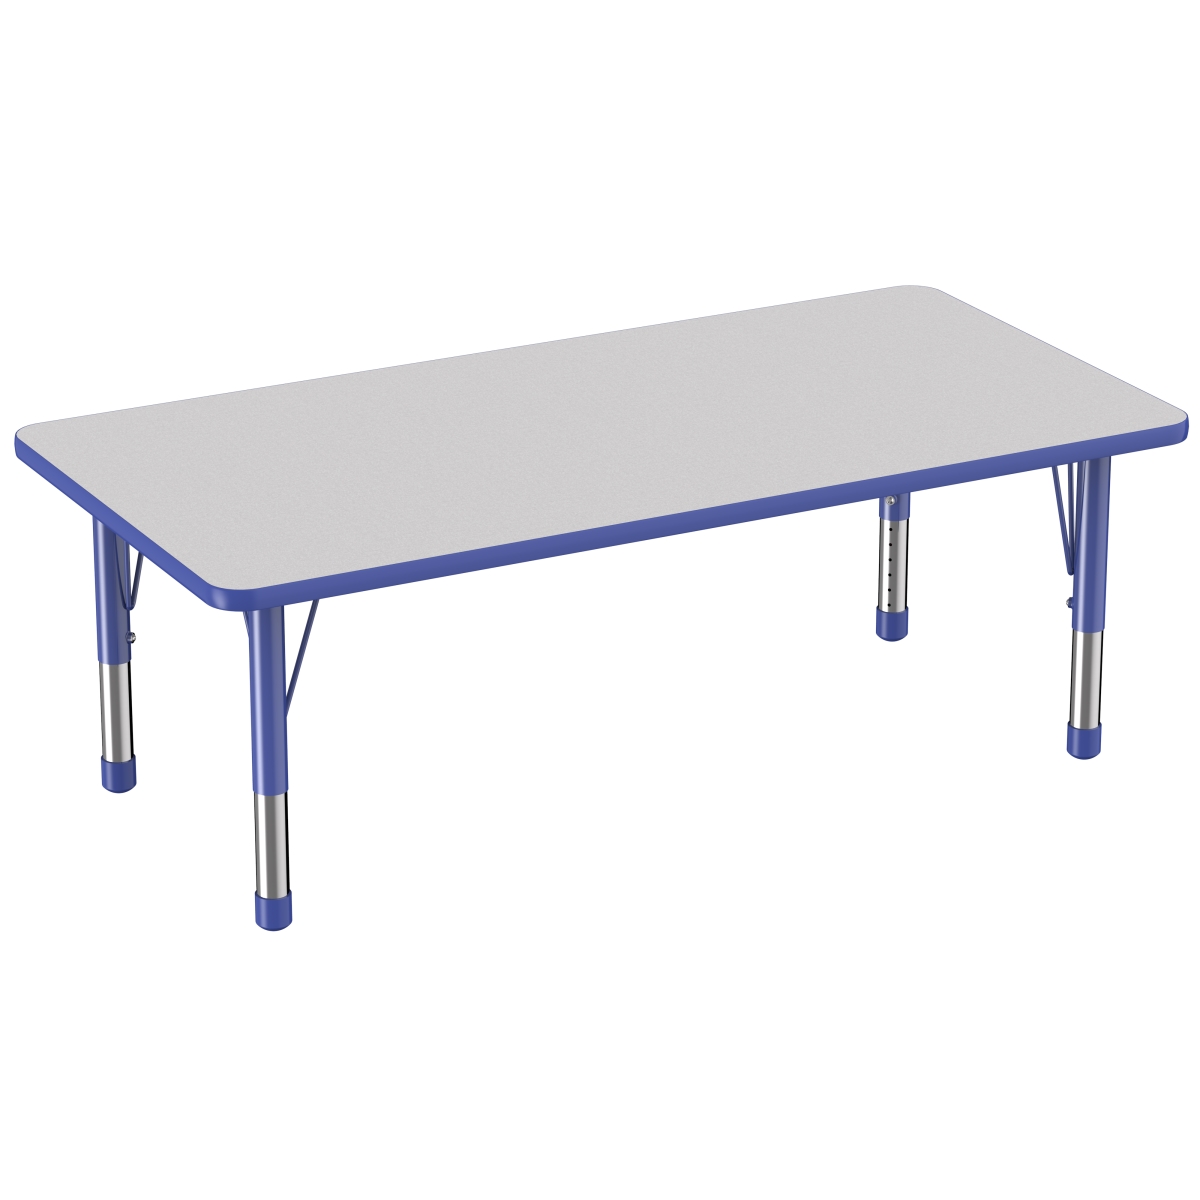 10025-gybl 30 X 60 In. Rectangle T-mold Adjustable Activity Table With Chunky Leg - Grey & Blue